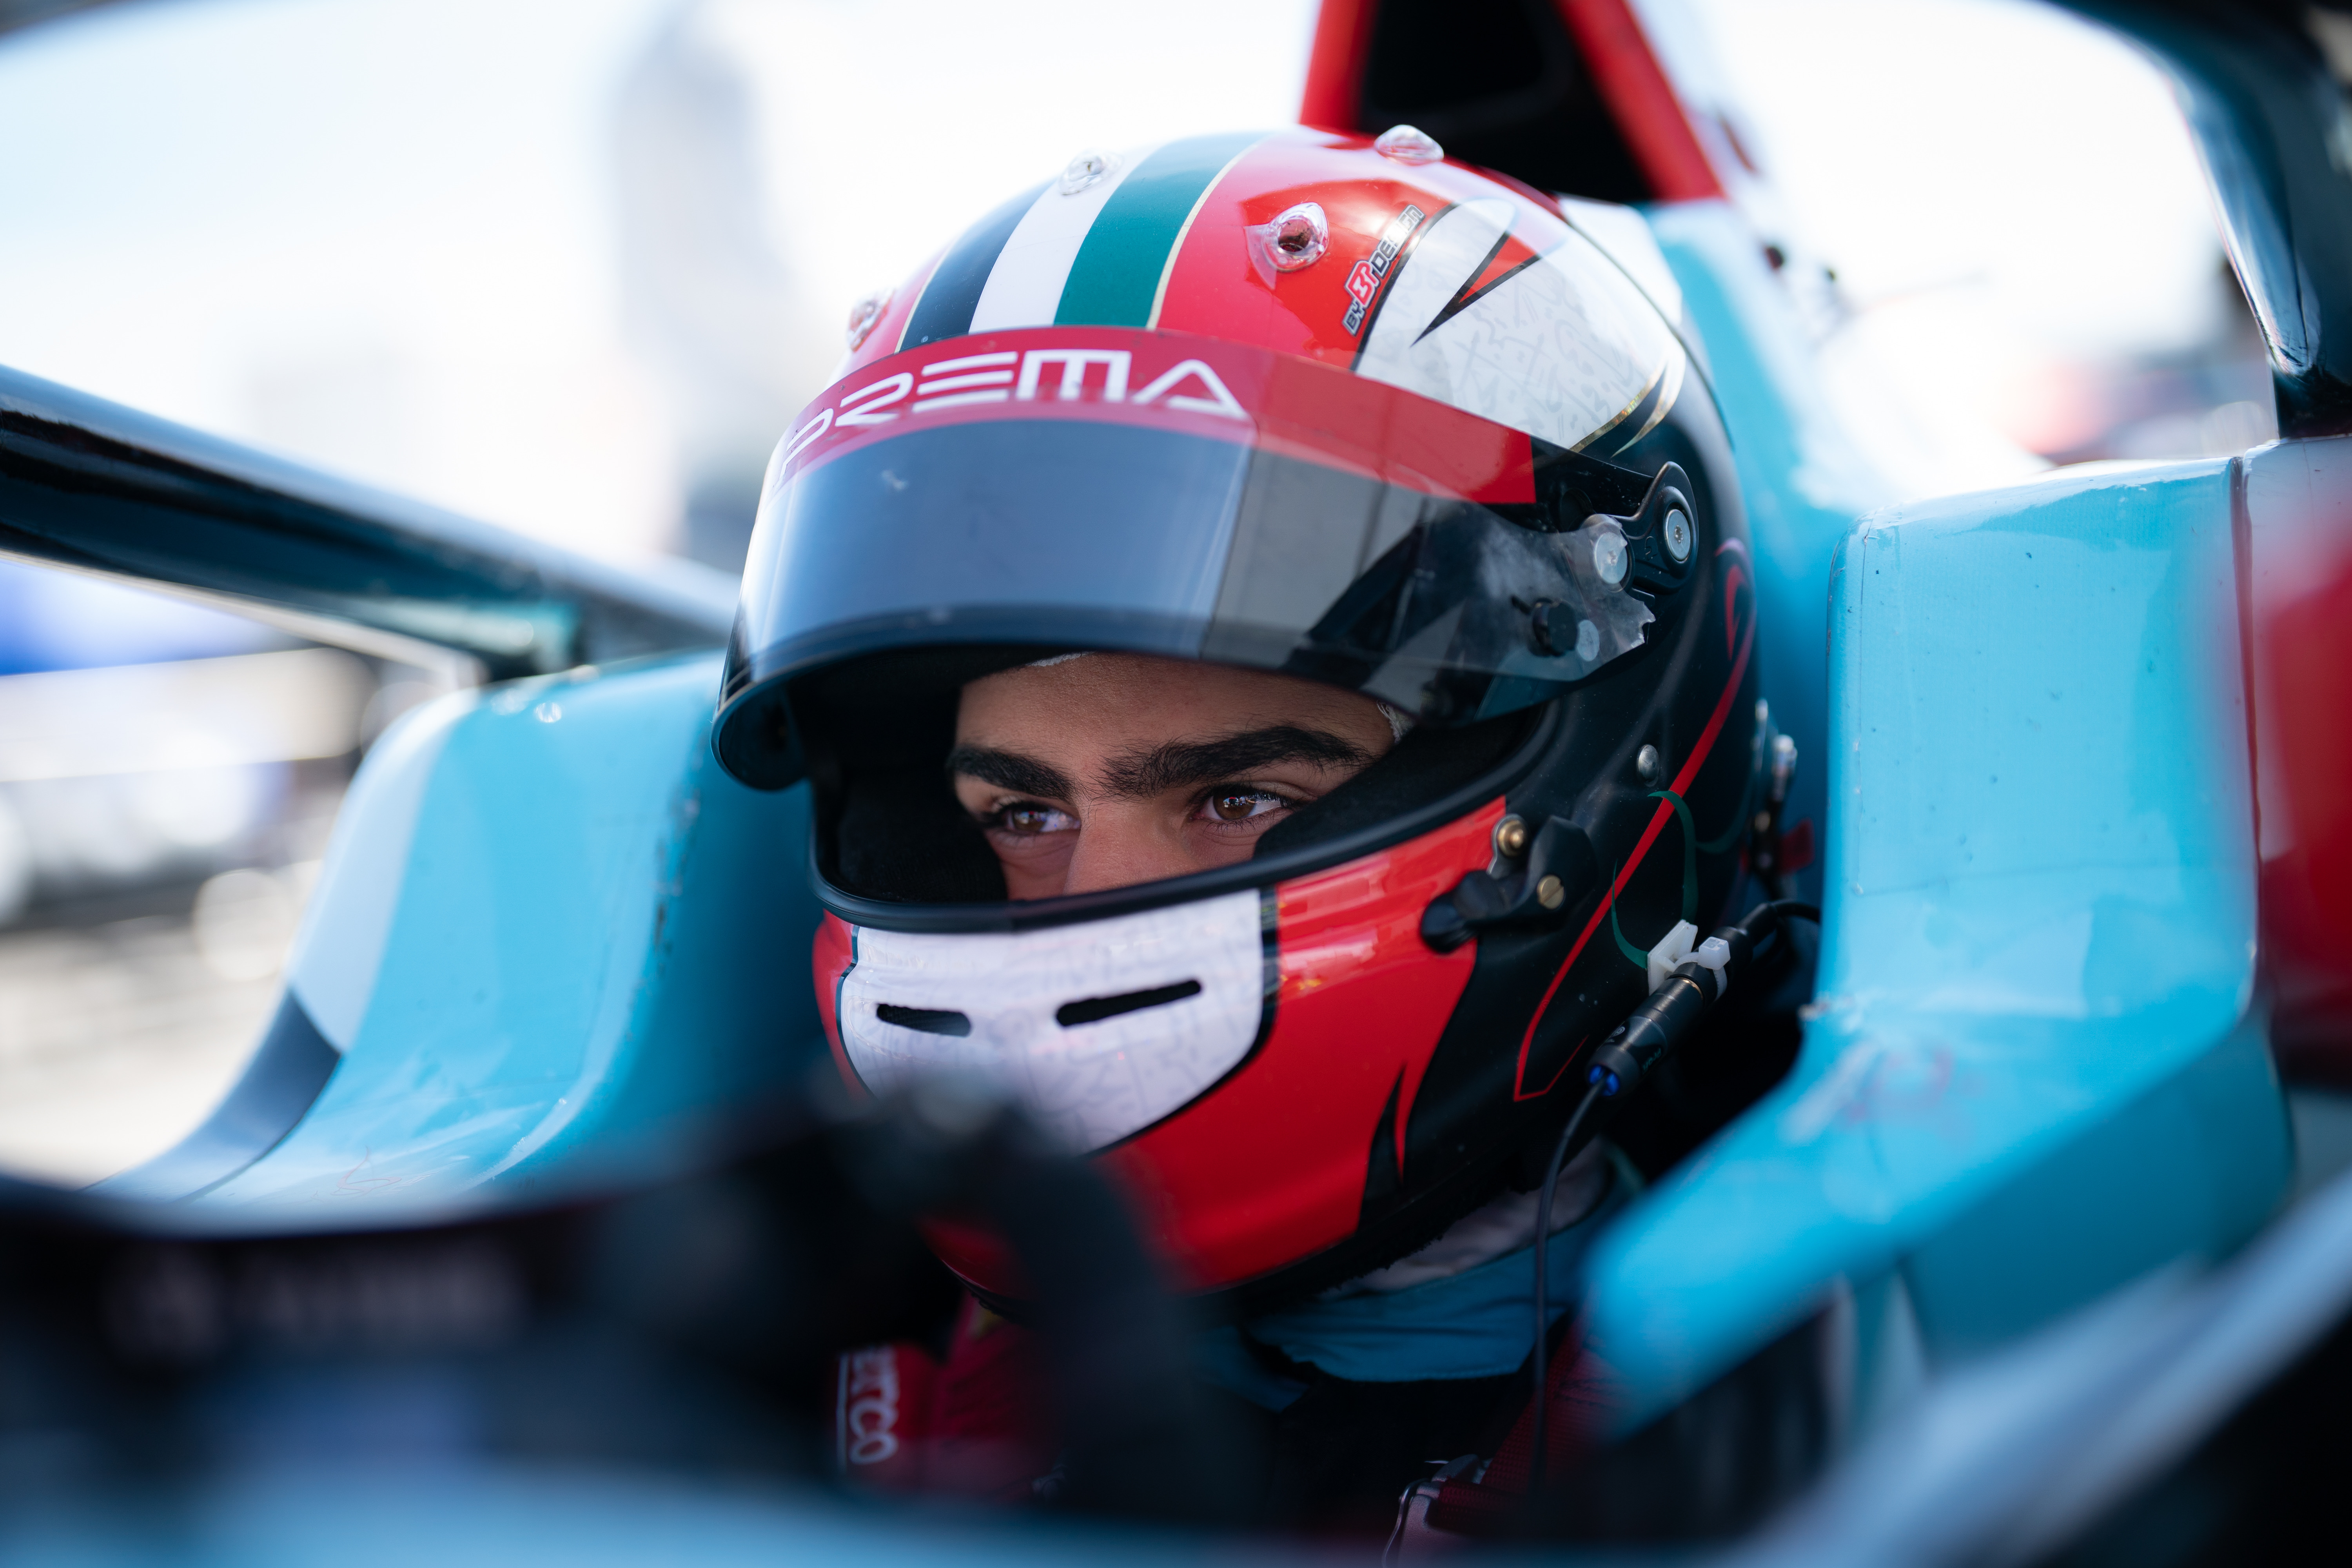 I want to inspire young Arabs, says Emirati teenager on road to F1 stardom